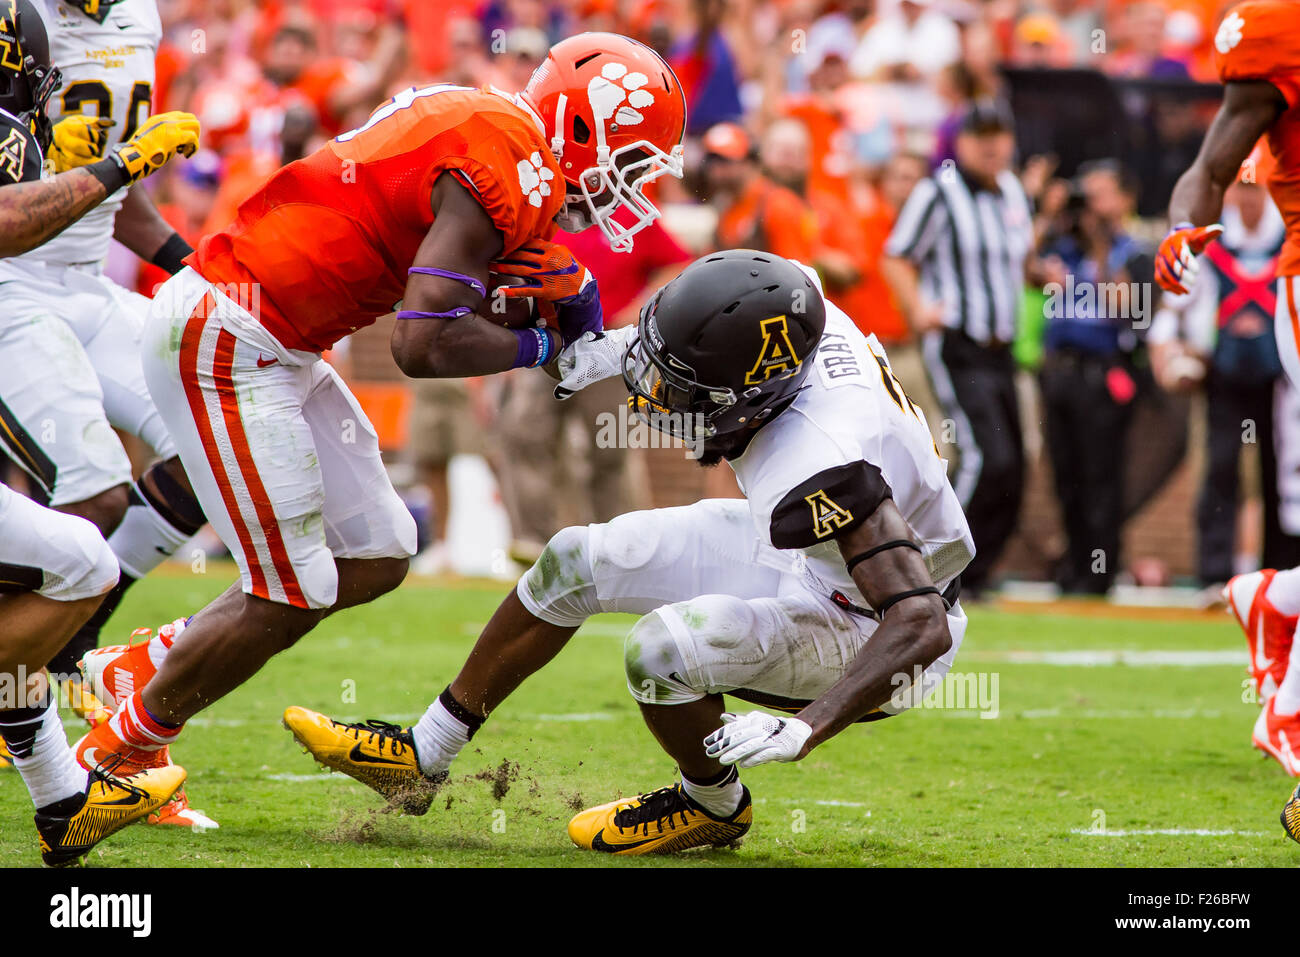 Clemson Tigers running back Wayne Gallman (9) runs over Appalachian State Mountaineers defensive back Alex Gray (3) at the goal line September 12, 2015 in action during the NCAA Football game between Appalachian State Mountaineers and Clemson Tigers at Death Valley in Clemson, SC. David Grooms/CSM Stock Photo